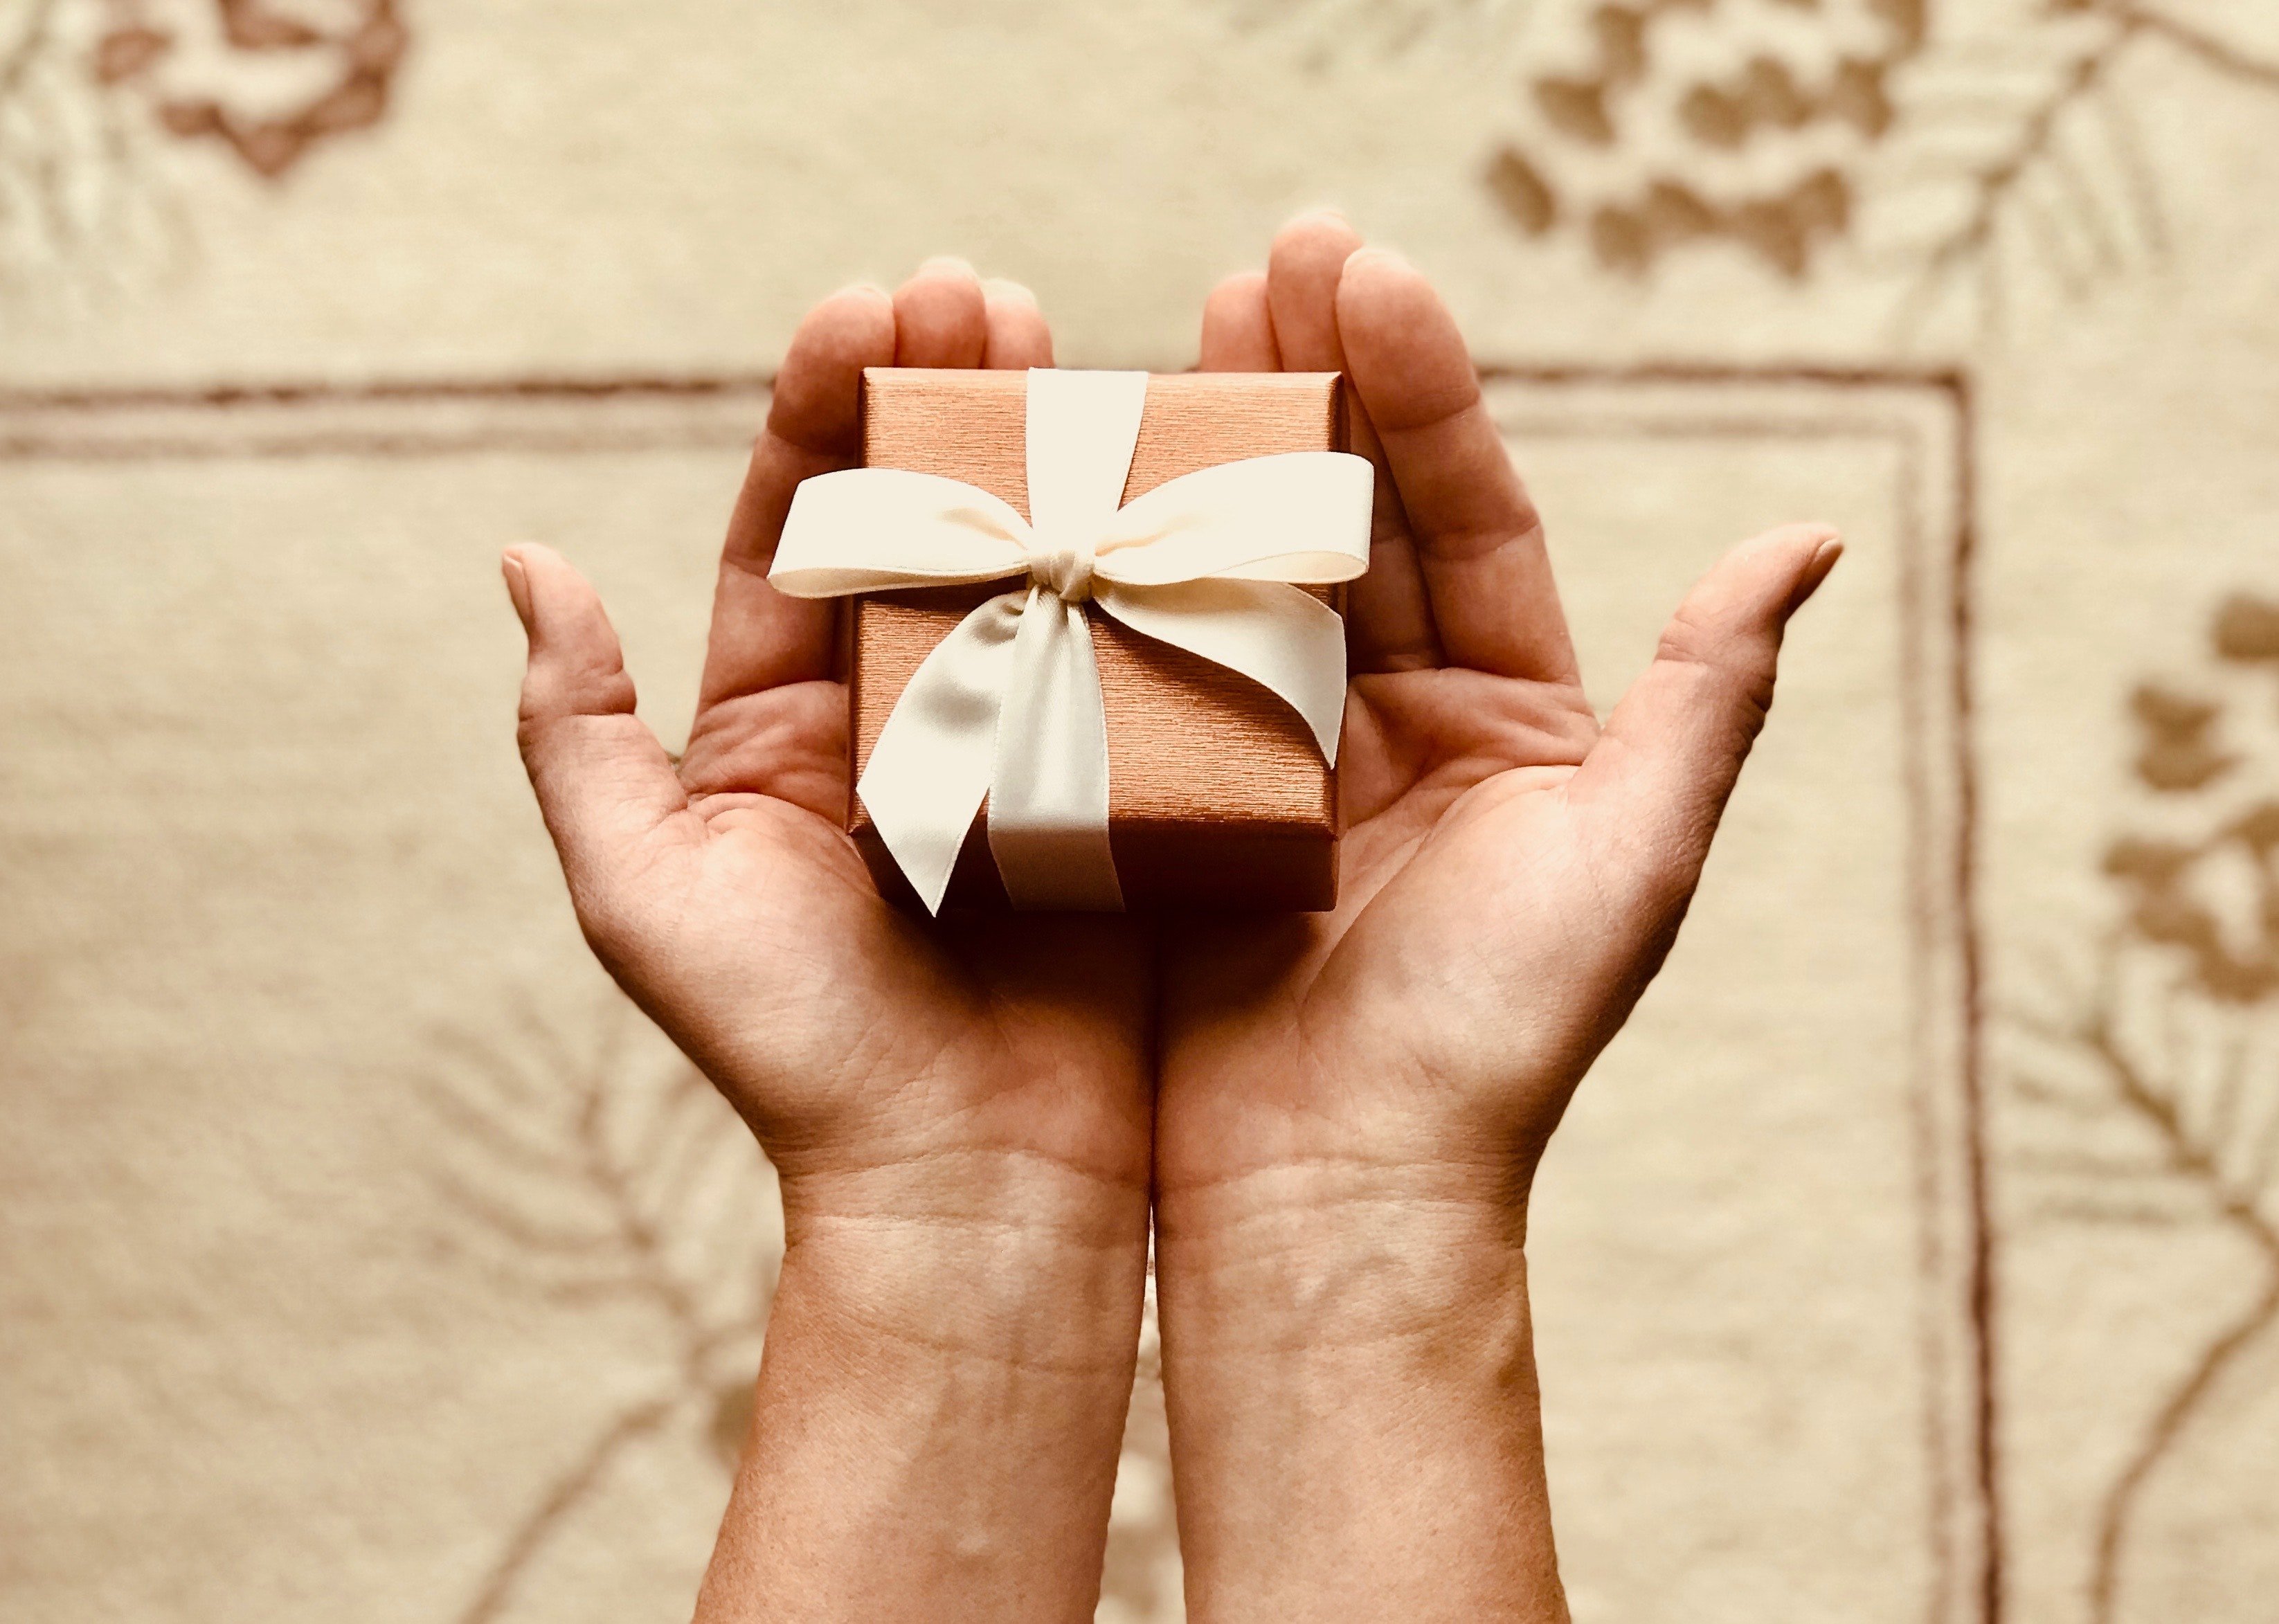 OP received a small box and a letter | Photo: Pexels